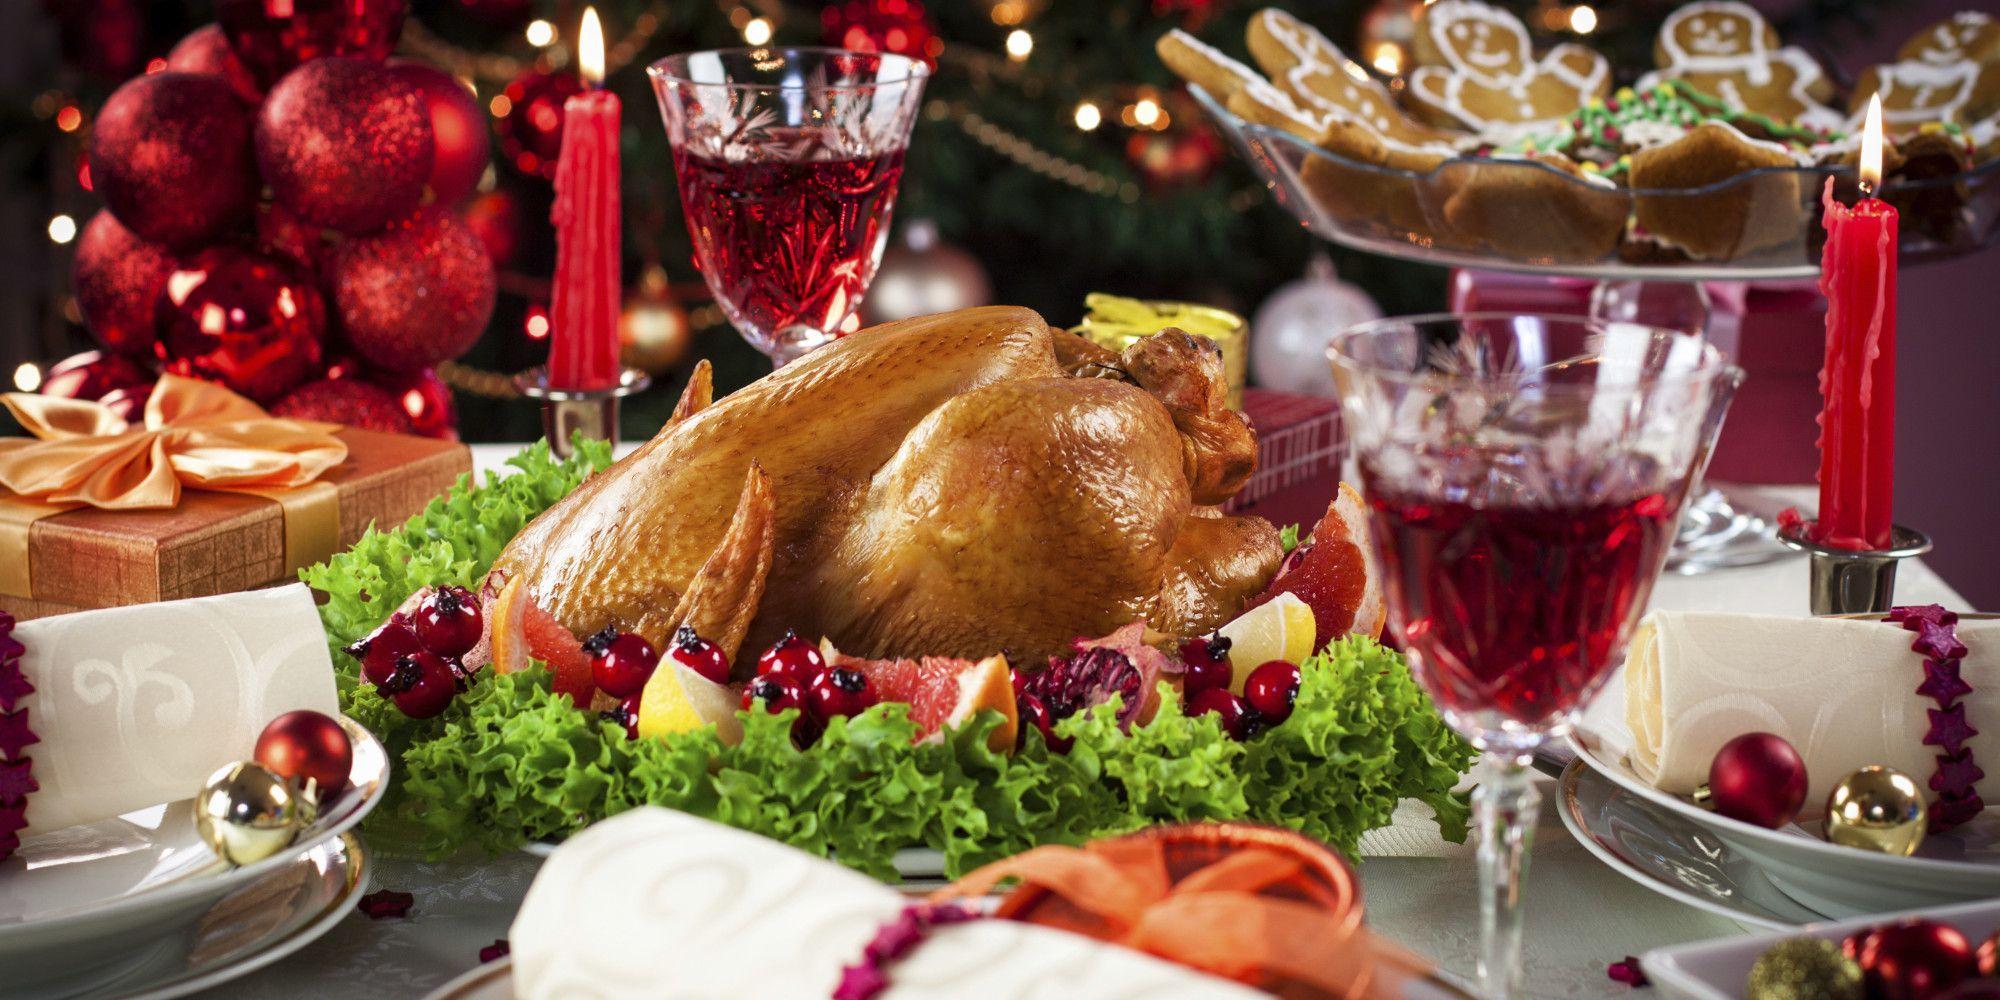 Kitchen Gadgets To Short Cut Your Way To Christmas Dinner